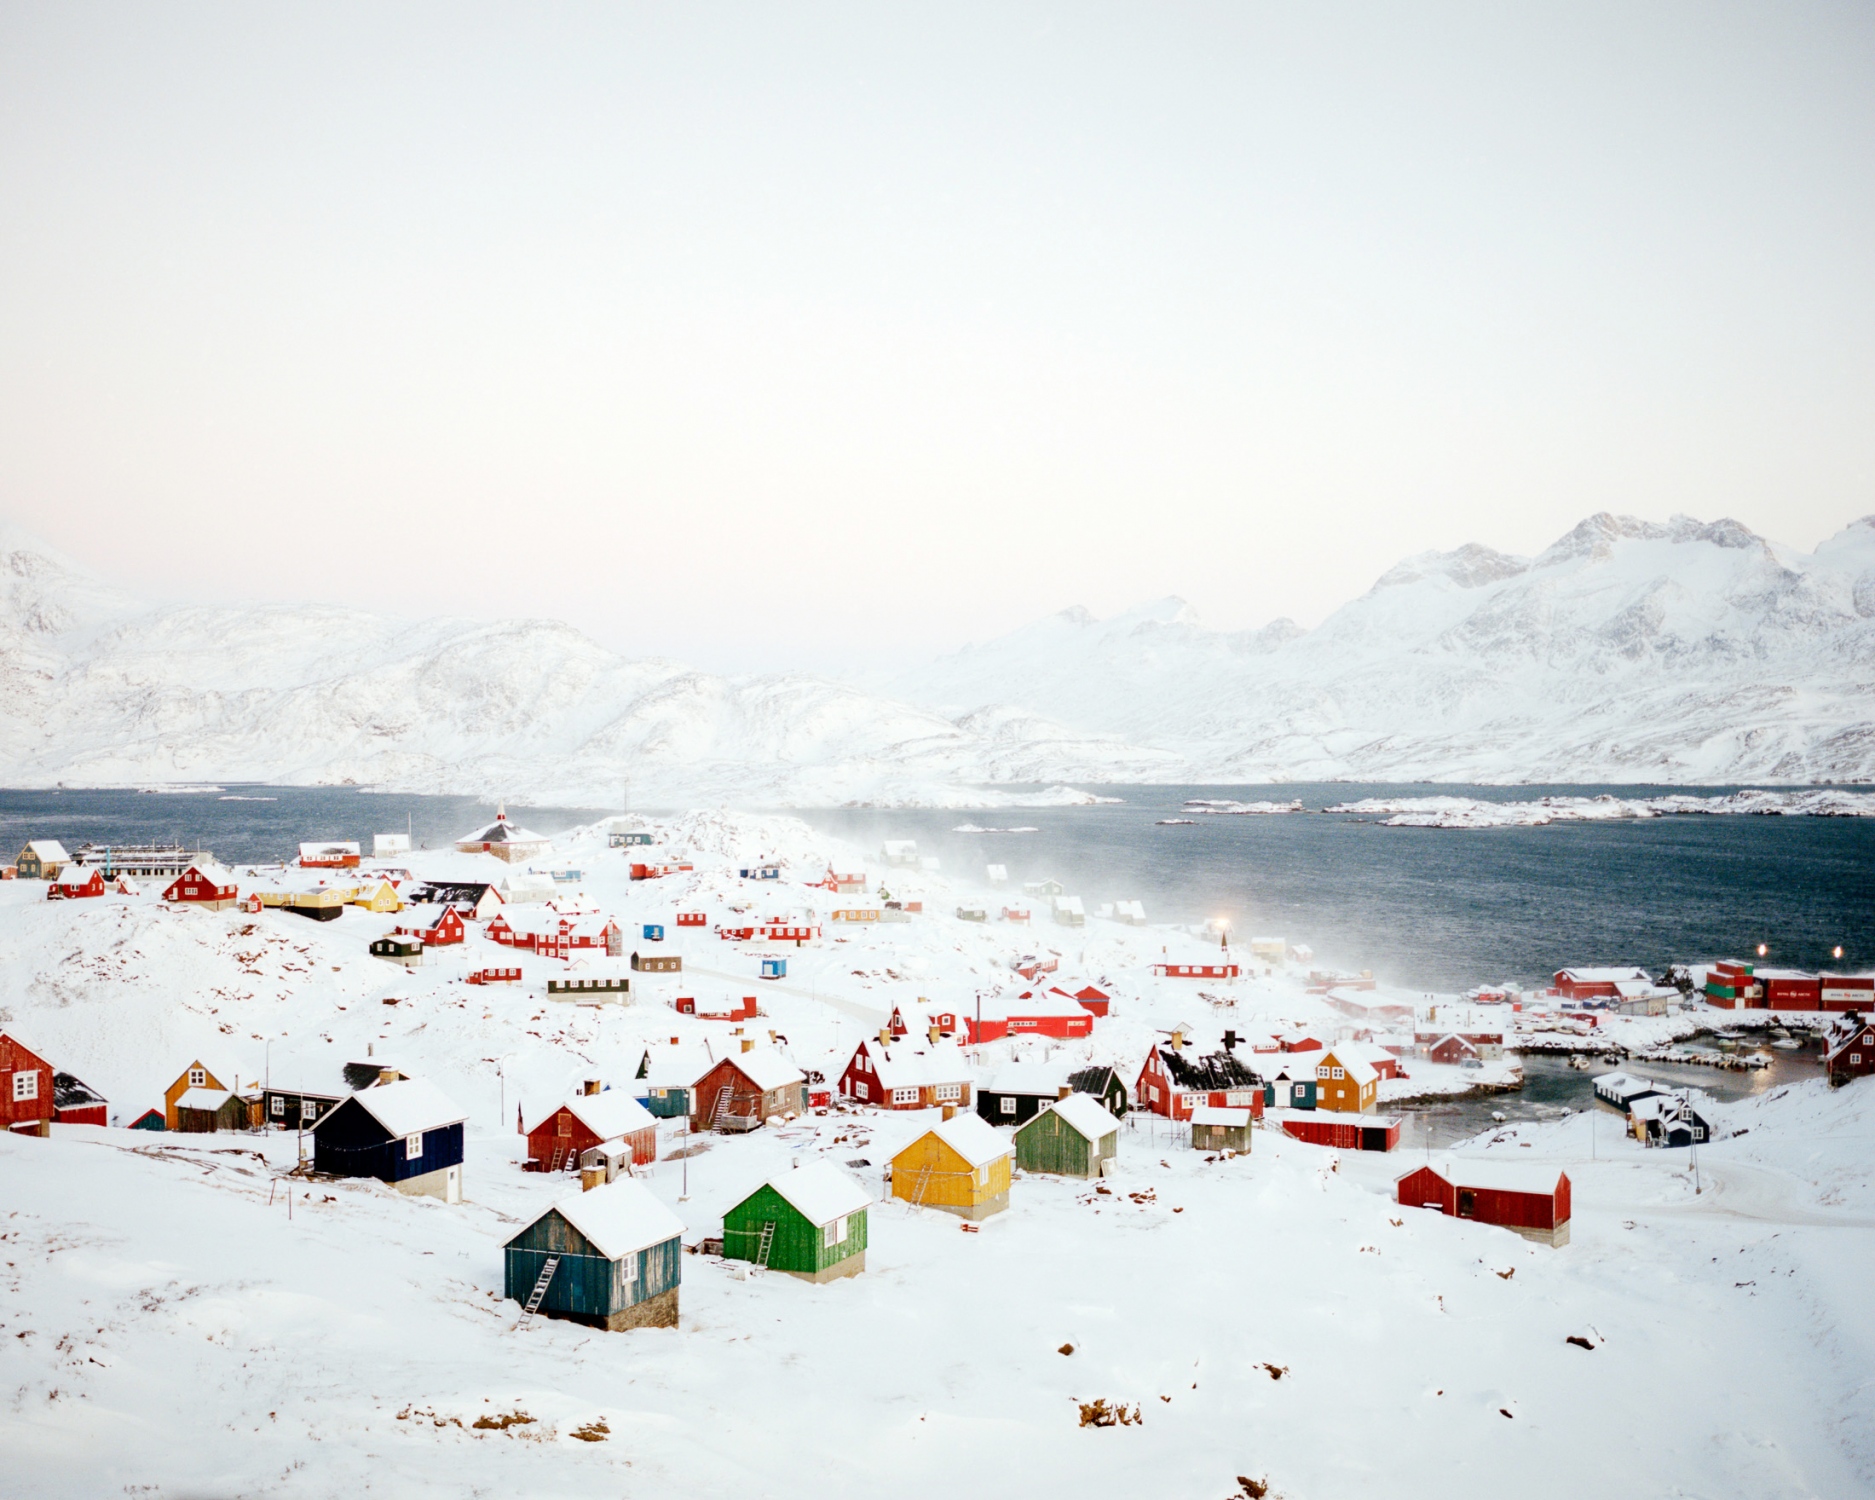 Piterak, a strong wind carrying a high density of cold air from a higher elevation down a slope blows over Tasiilaq. As a result the village is disconnected from Greenland and the World. Each town in Greenland are linked to each other by airplane or boat only.